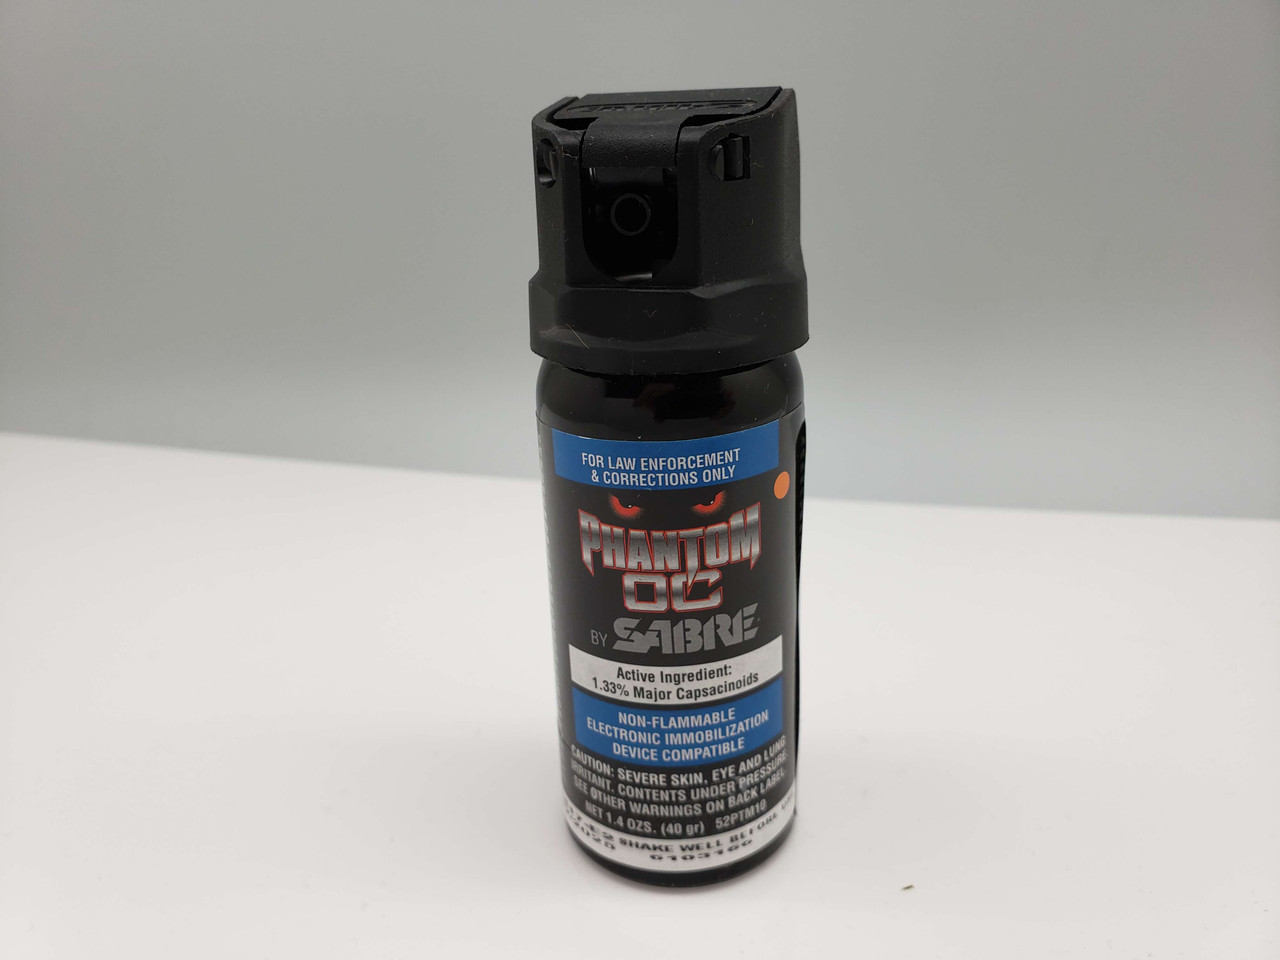 What Does OC Pepper Spray Stand For